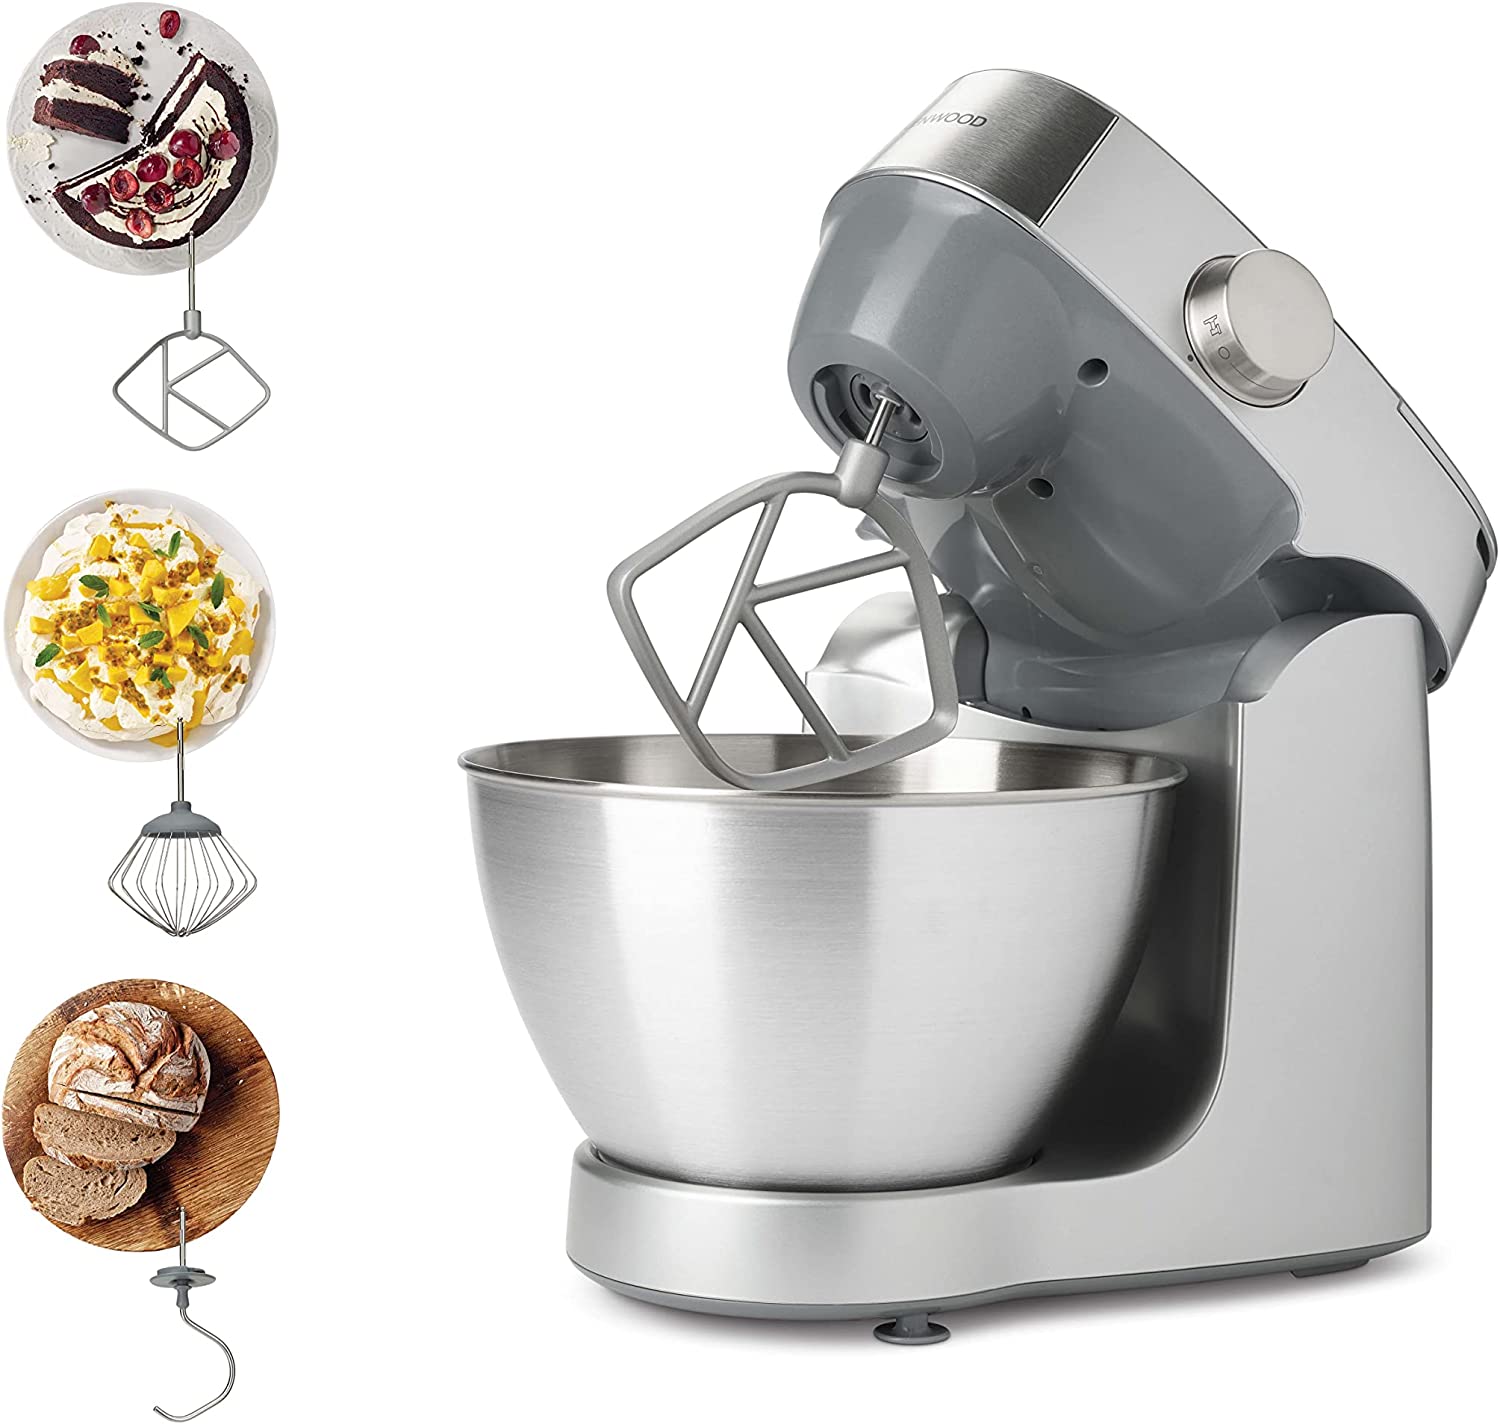 KENWOOD Prospero+ KHC29.A0SI 2-in-1 Stand Mixer - Silver